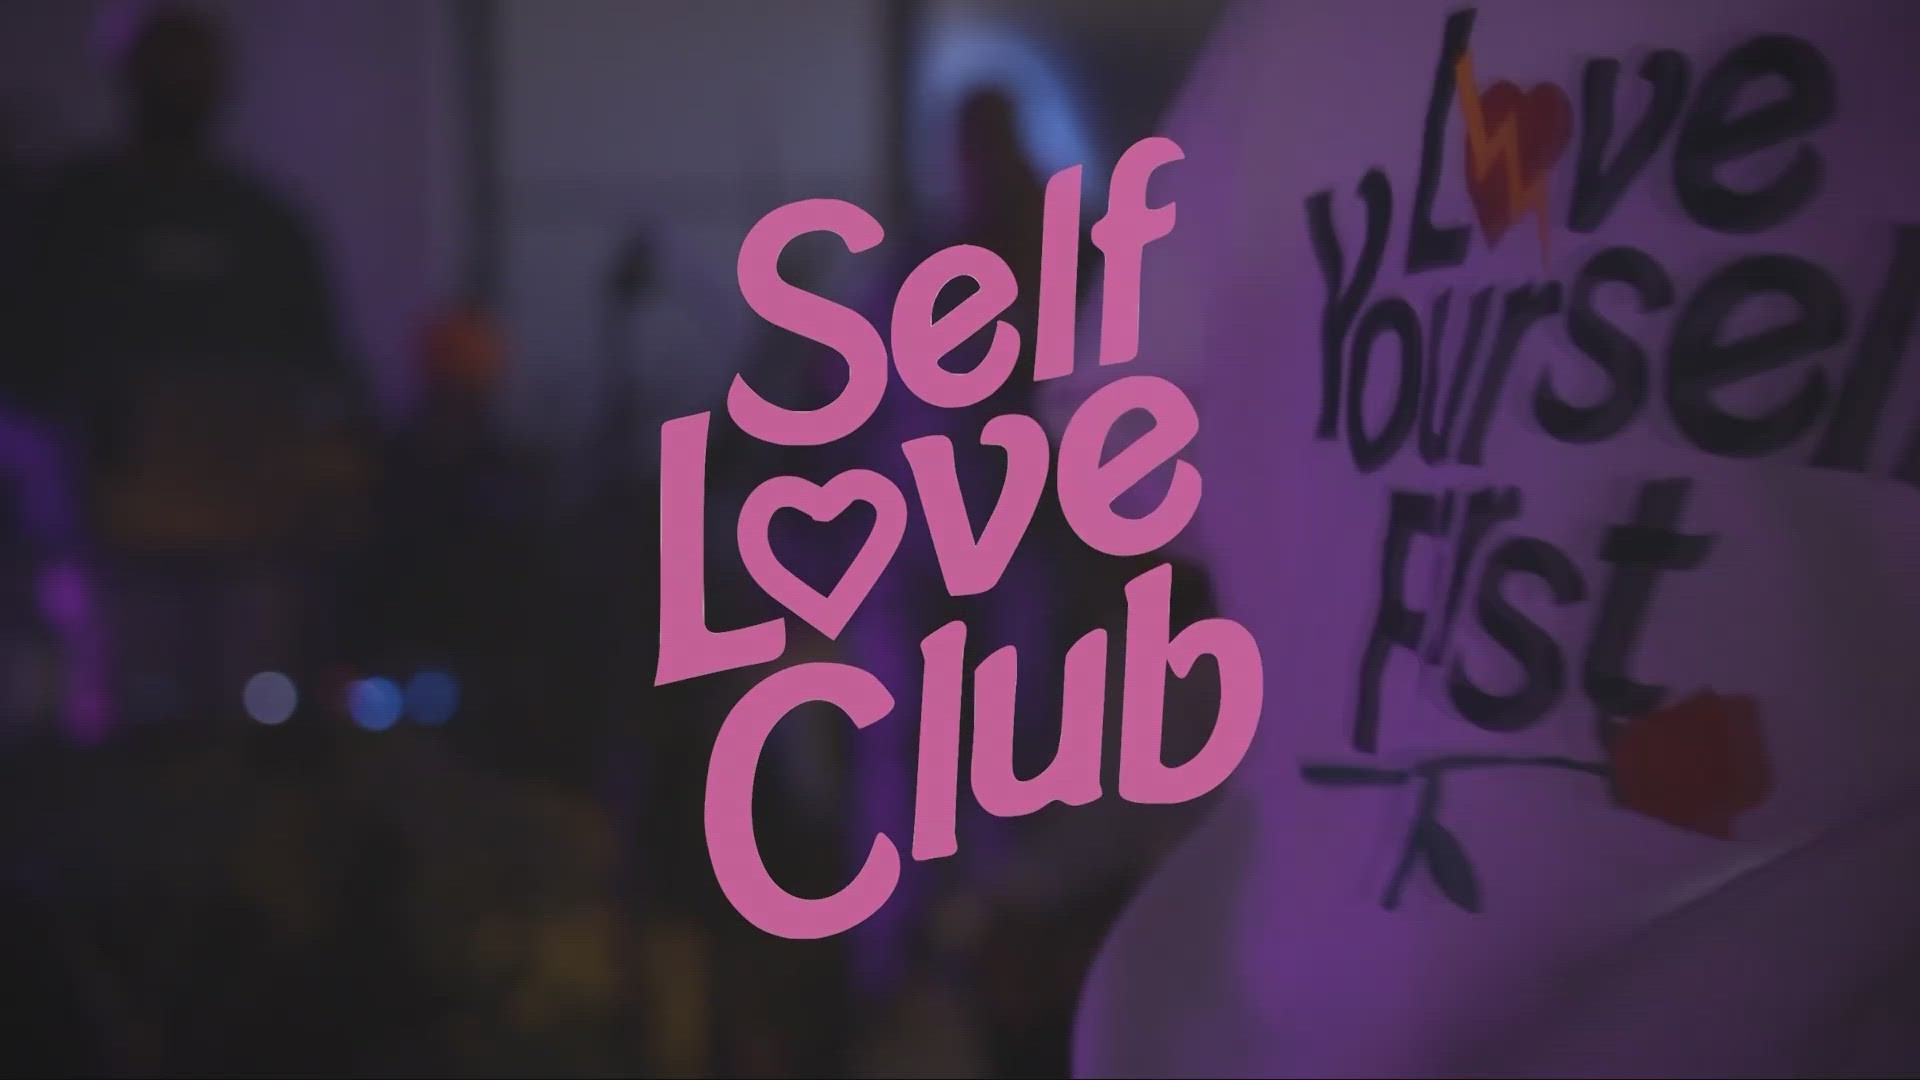 Providing stigma-free spaces, the Cleveland-based organization offers events, resources, and community for people on their self-love journey.